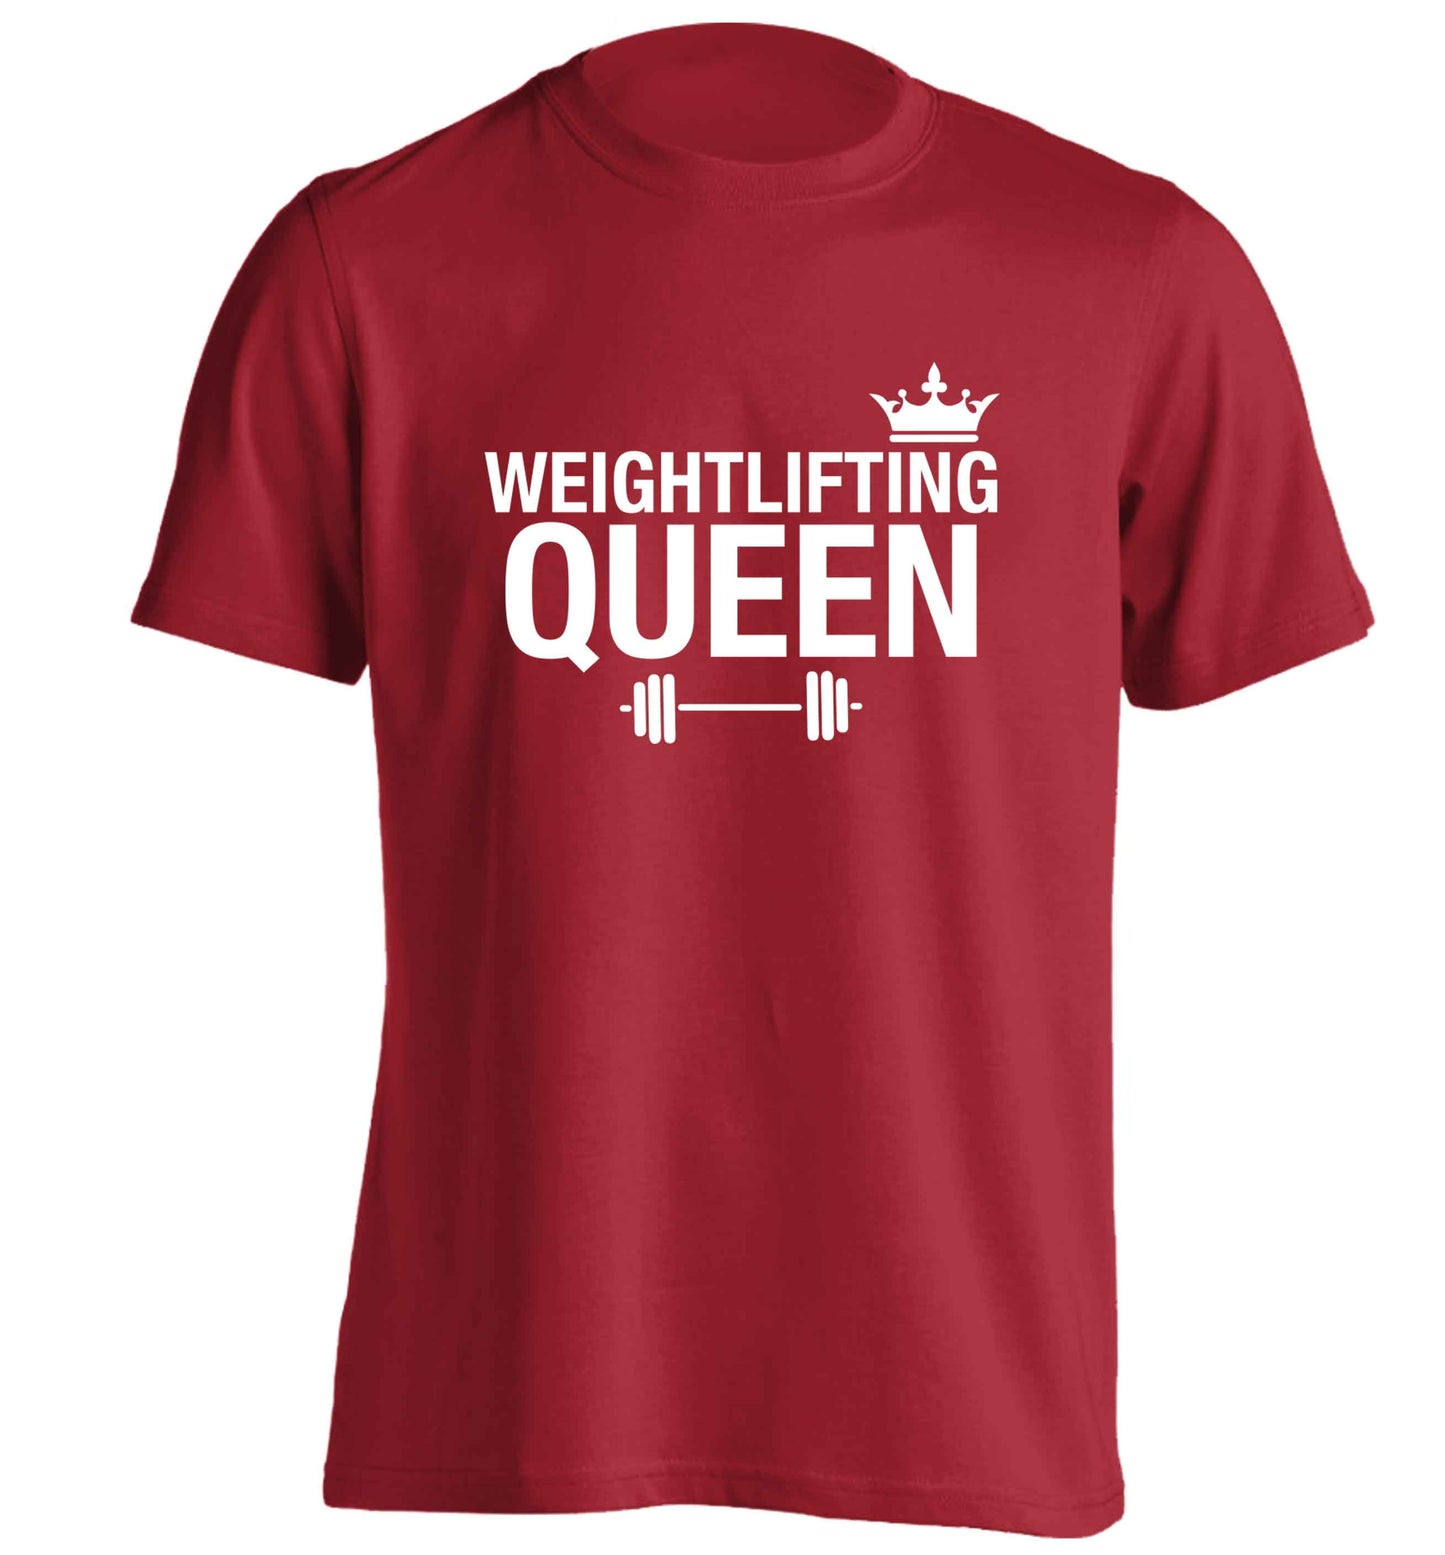 Weightlifting Queen adults unisex red Tshirt 2XL